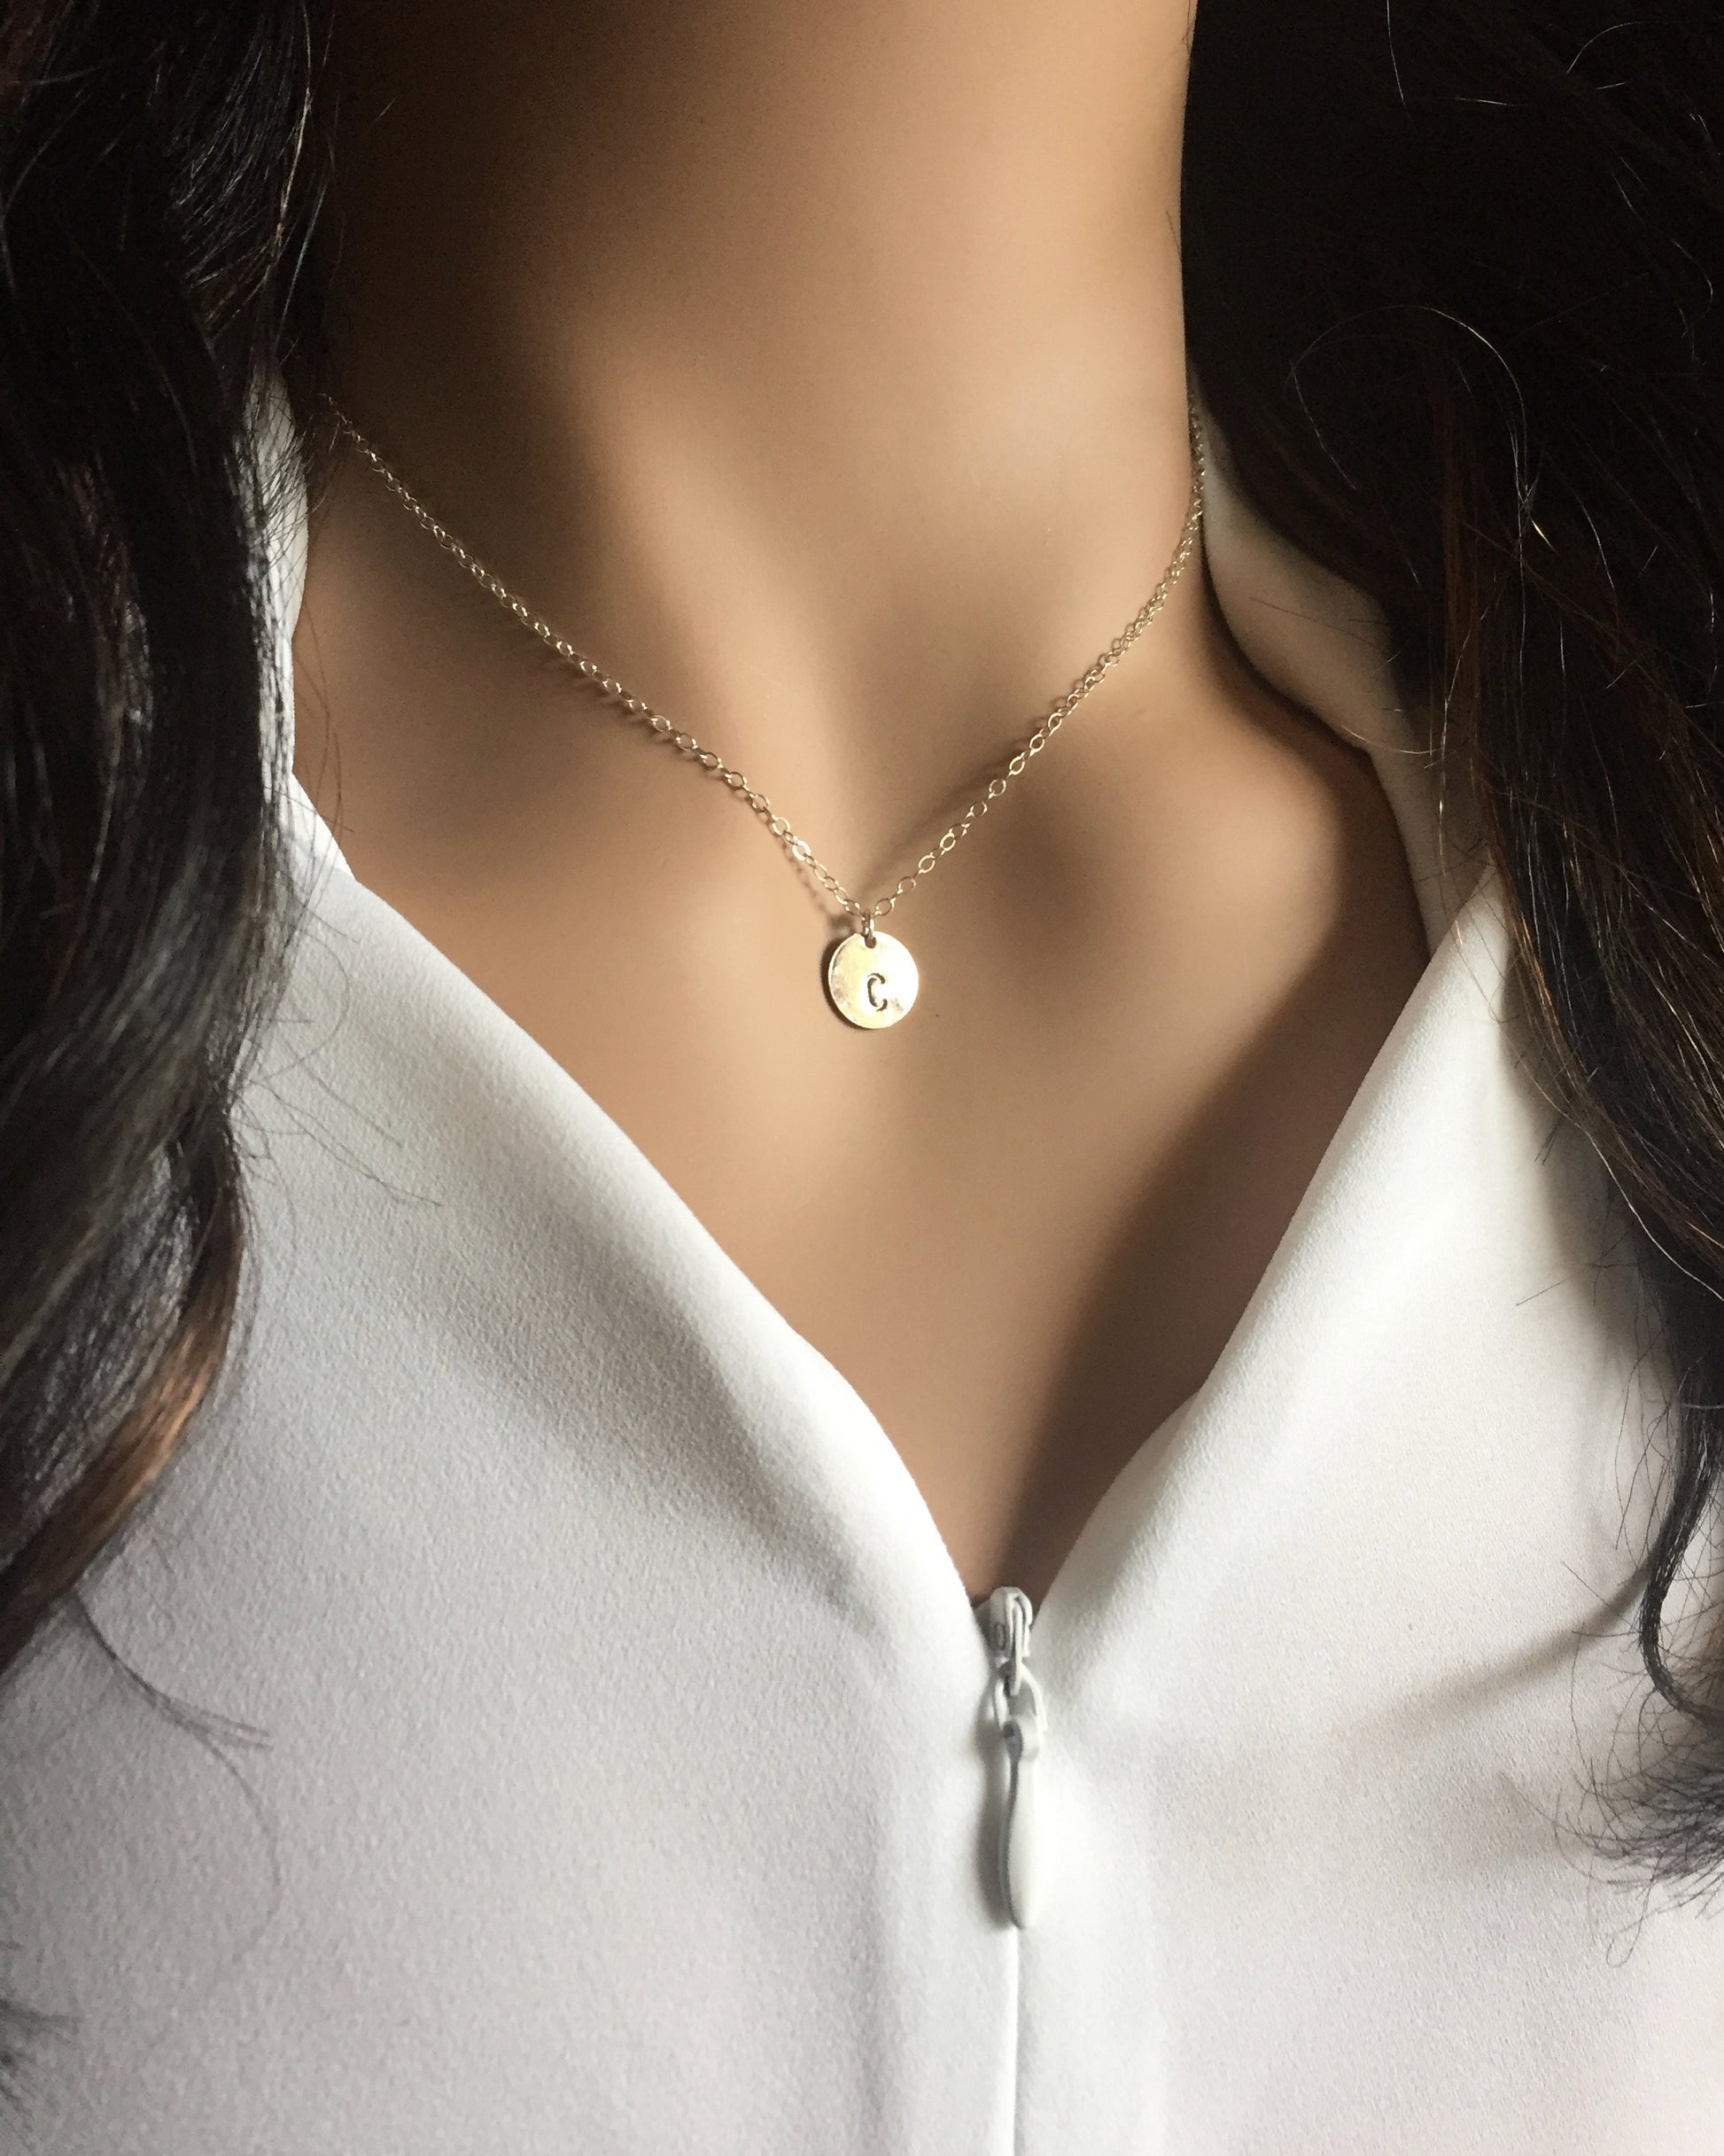 Delicate Initial Necklace | Initial Disc Necklace | Dainty Everyday Necklace | IB Jewelry